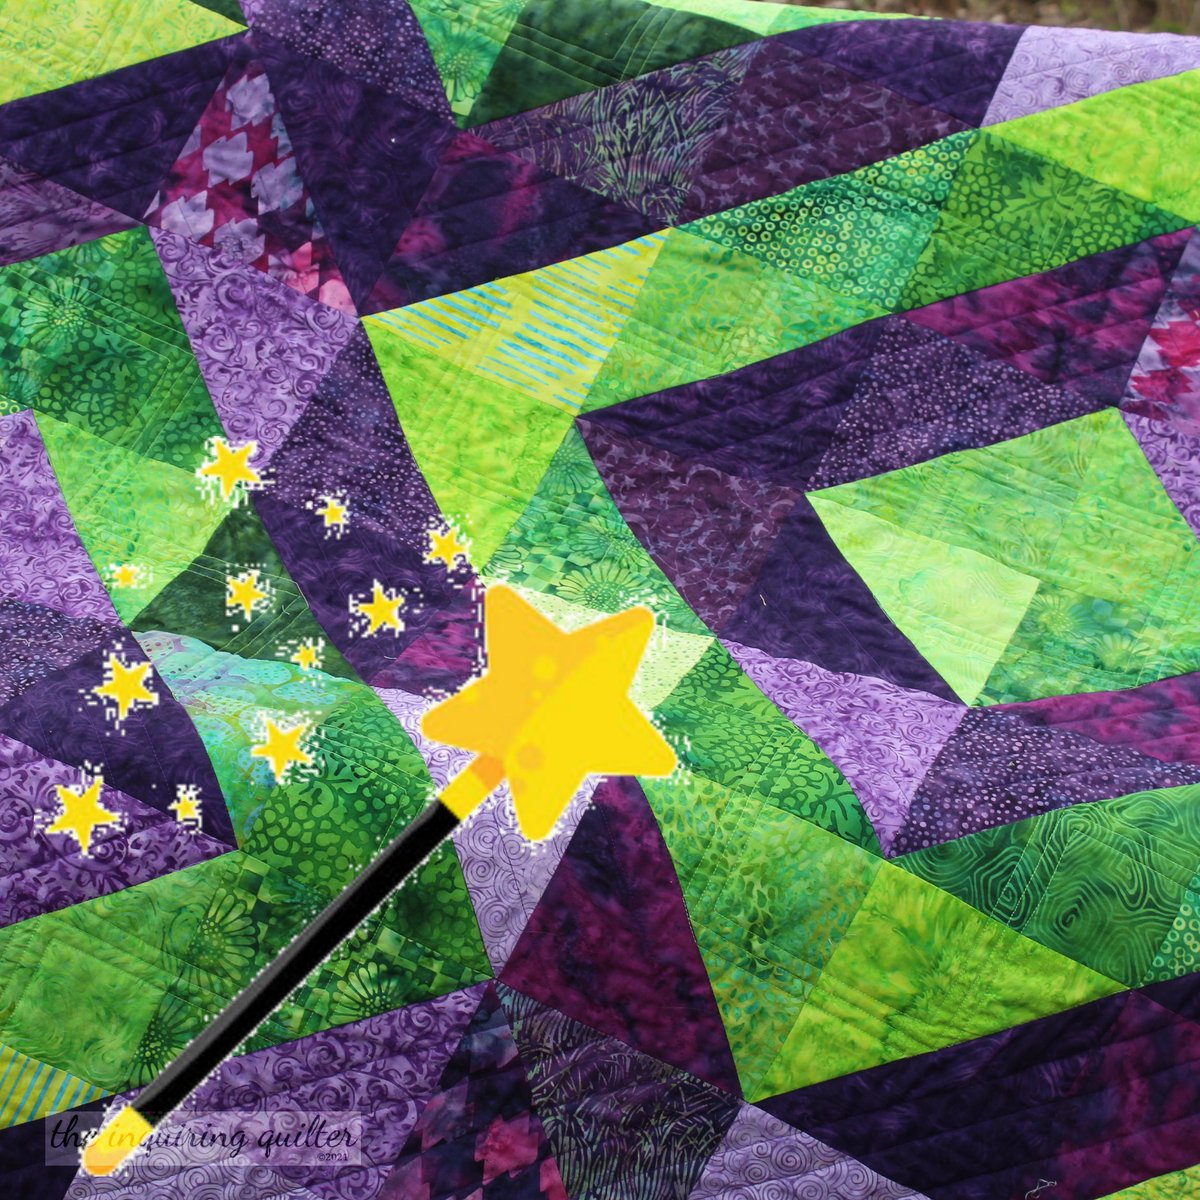 If you could wave a magic wand and have your biggest quilting challenge disappear, what would that be?